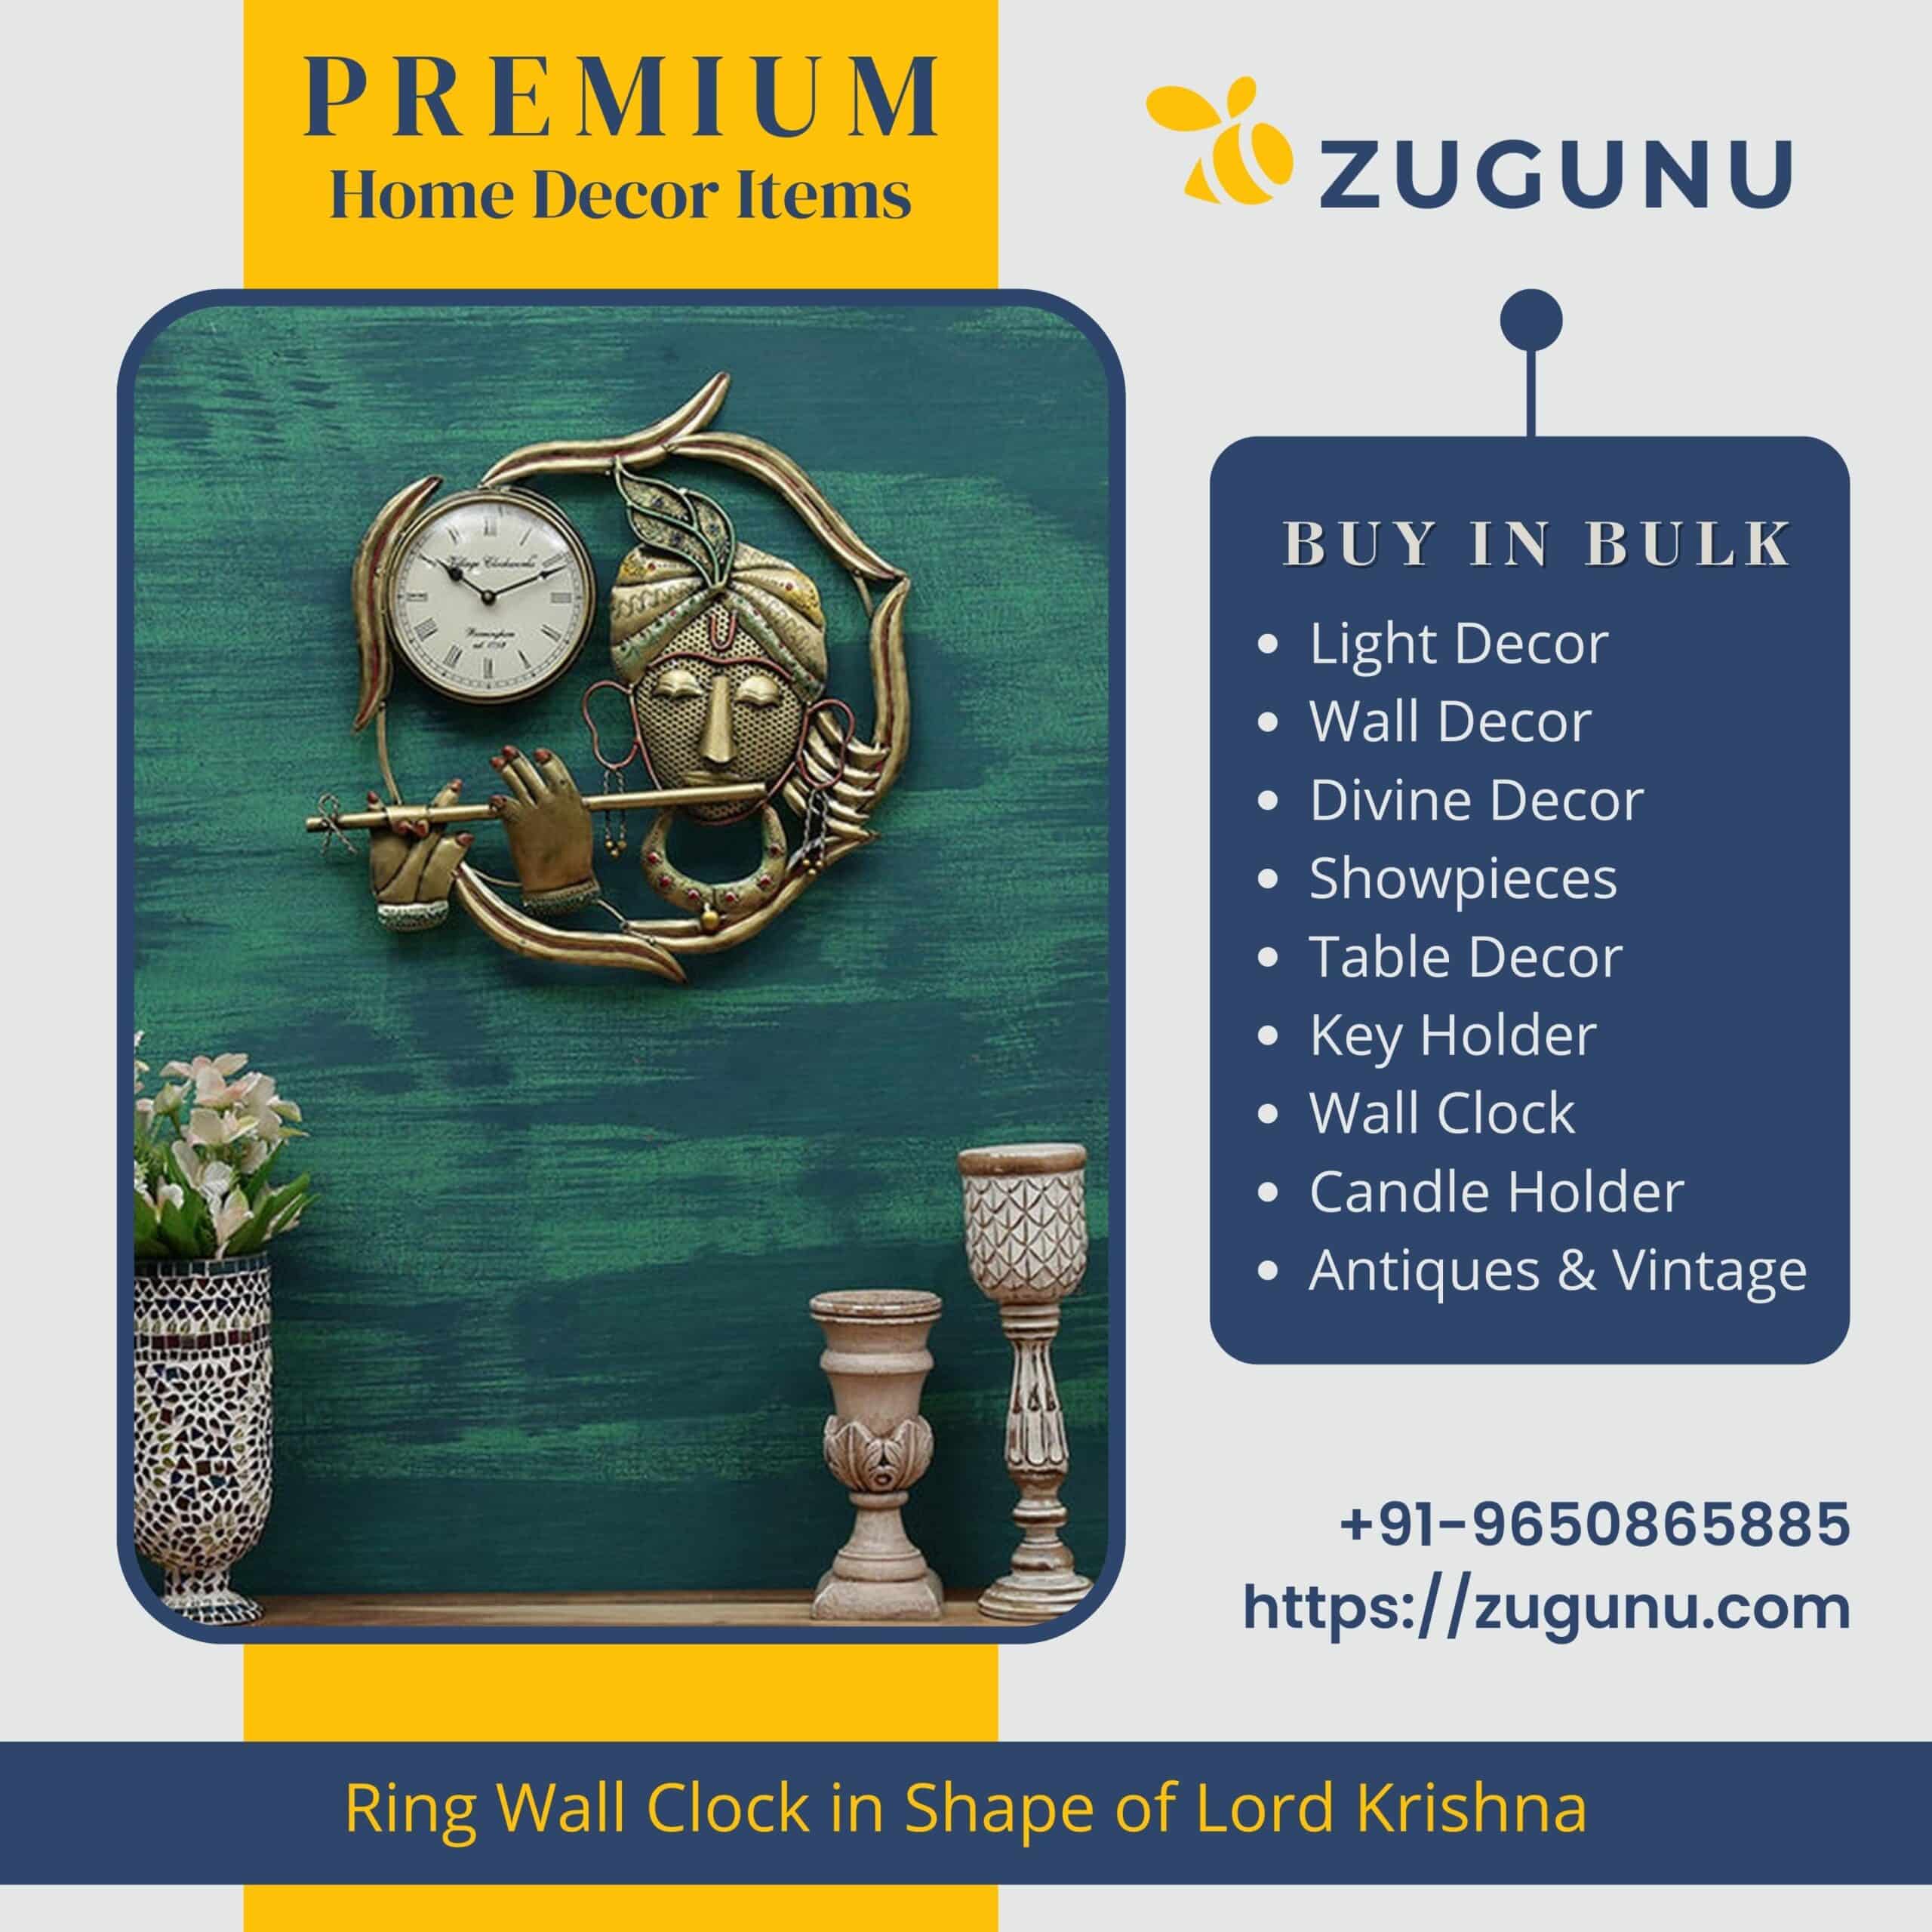 Ring Wall Clock in the Shape of Lord Krishna for Home Decor scaled